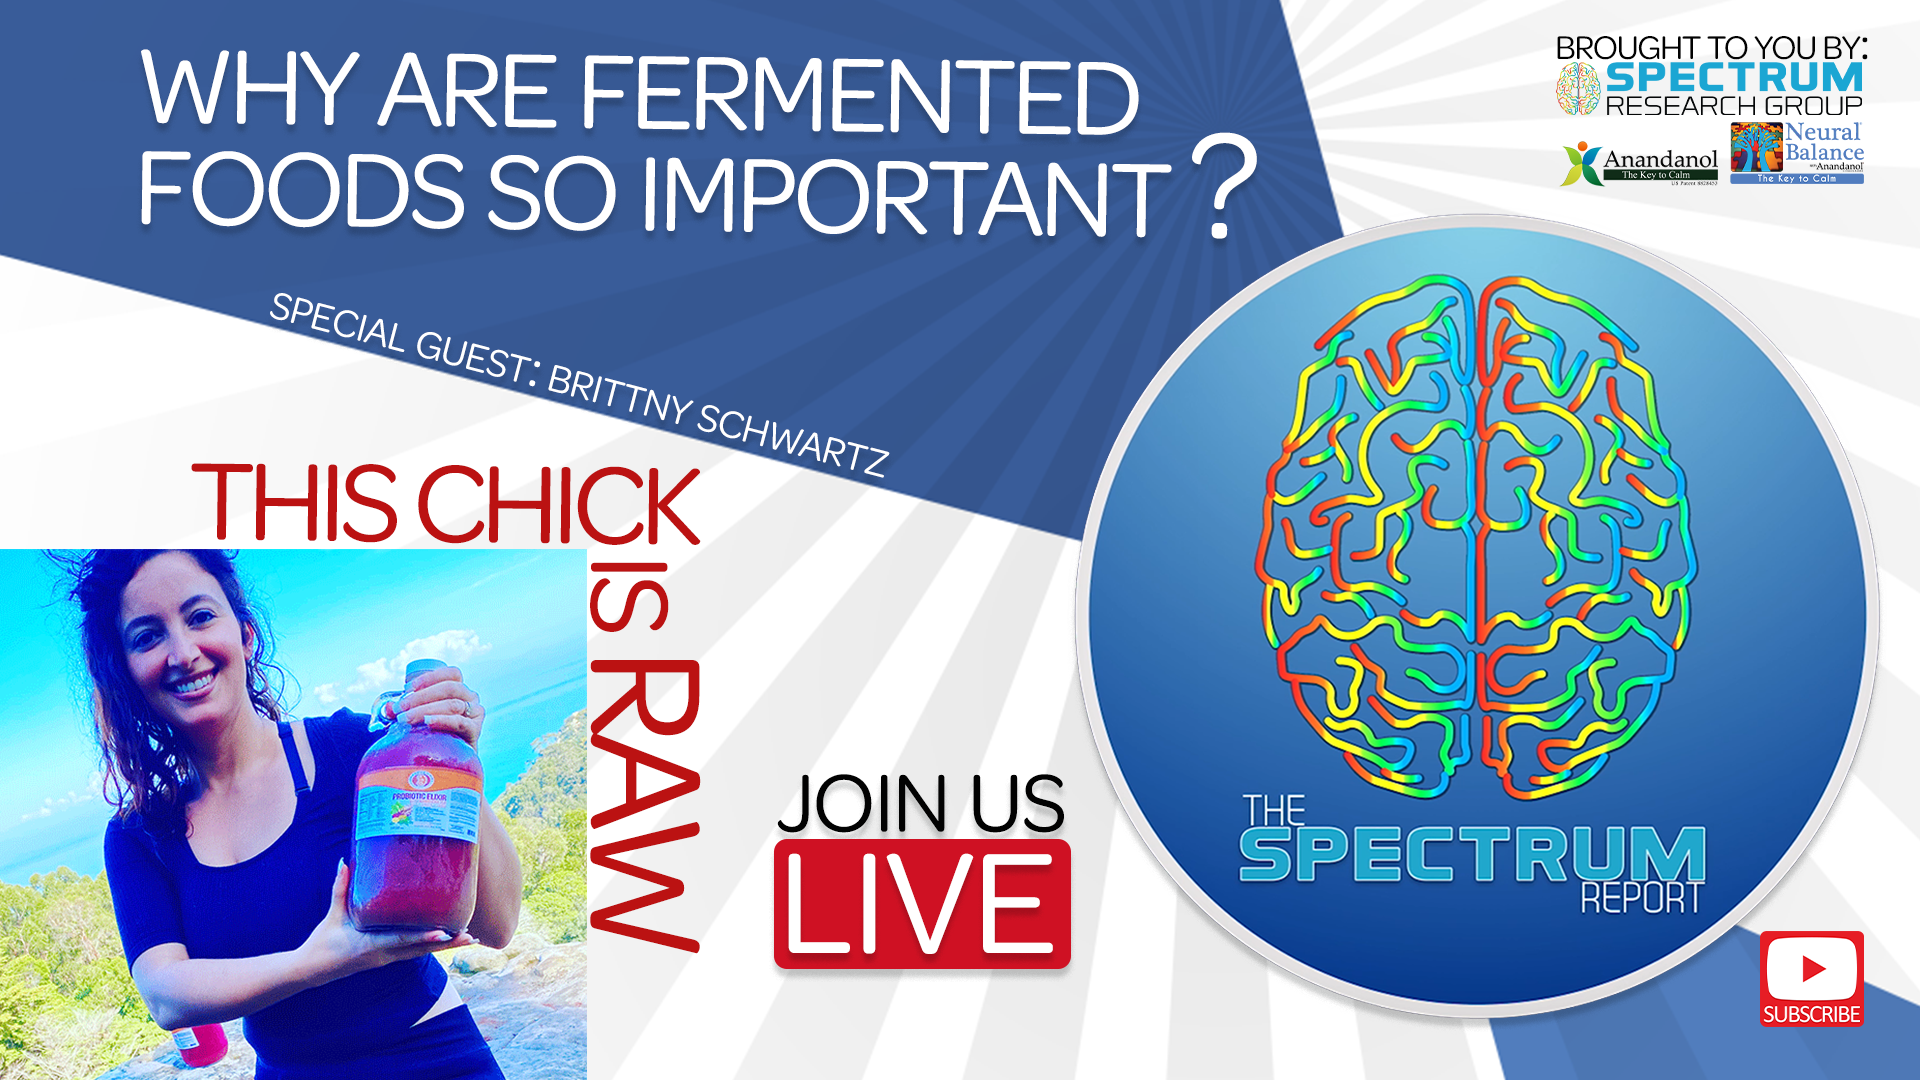 The Spectrum Report - Why are Fermented Foods so Important?